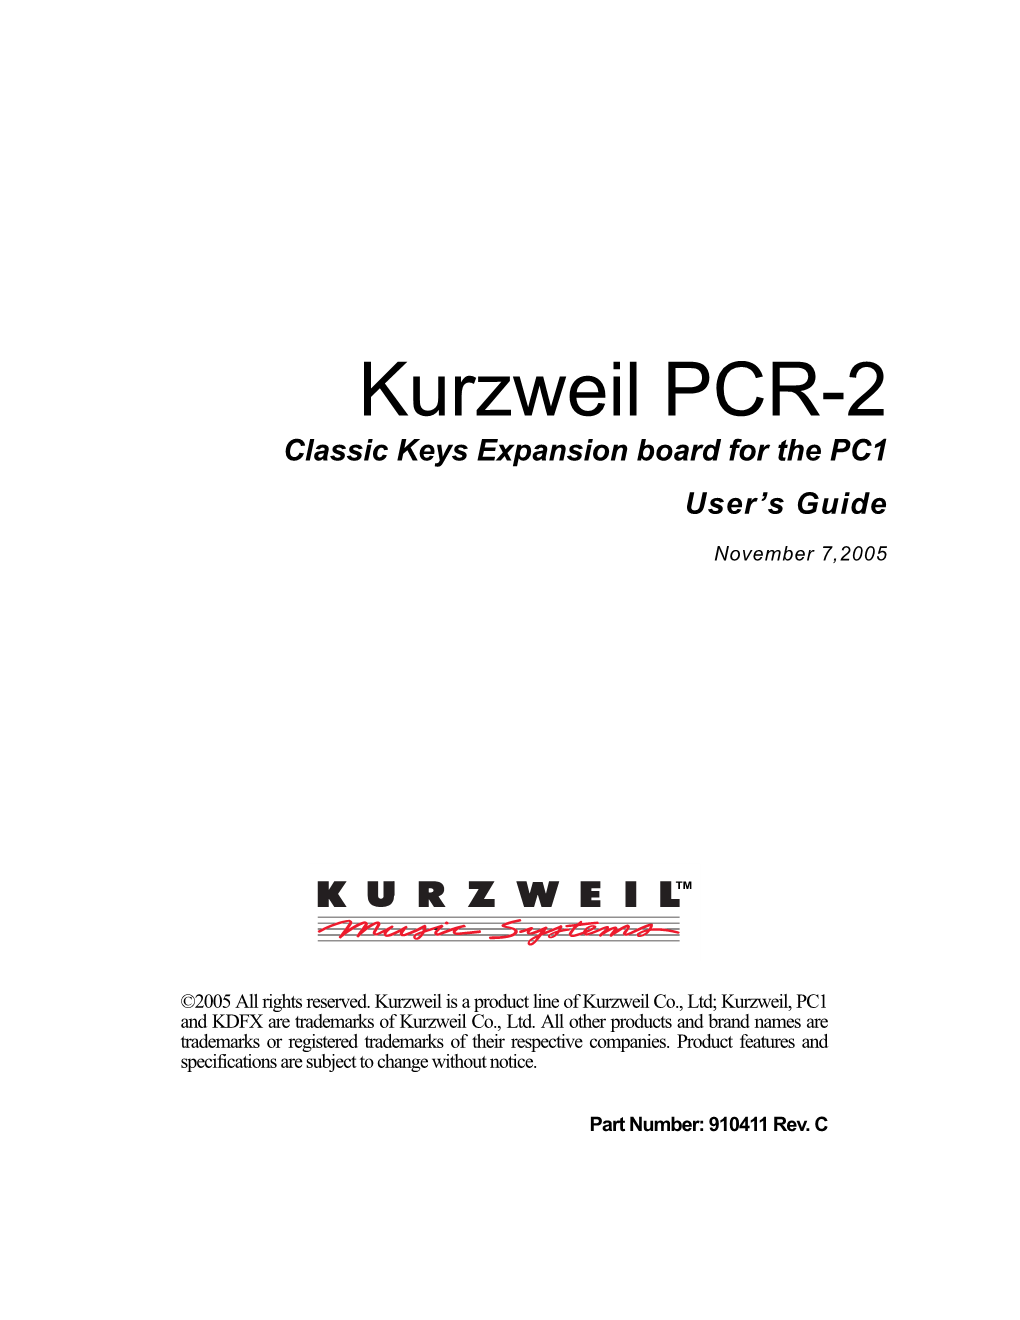 Kurzweil PCR-2 Classic Keys Expansion Board for the PC1 User’S Guide